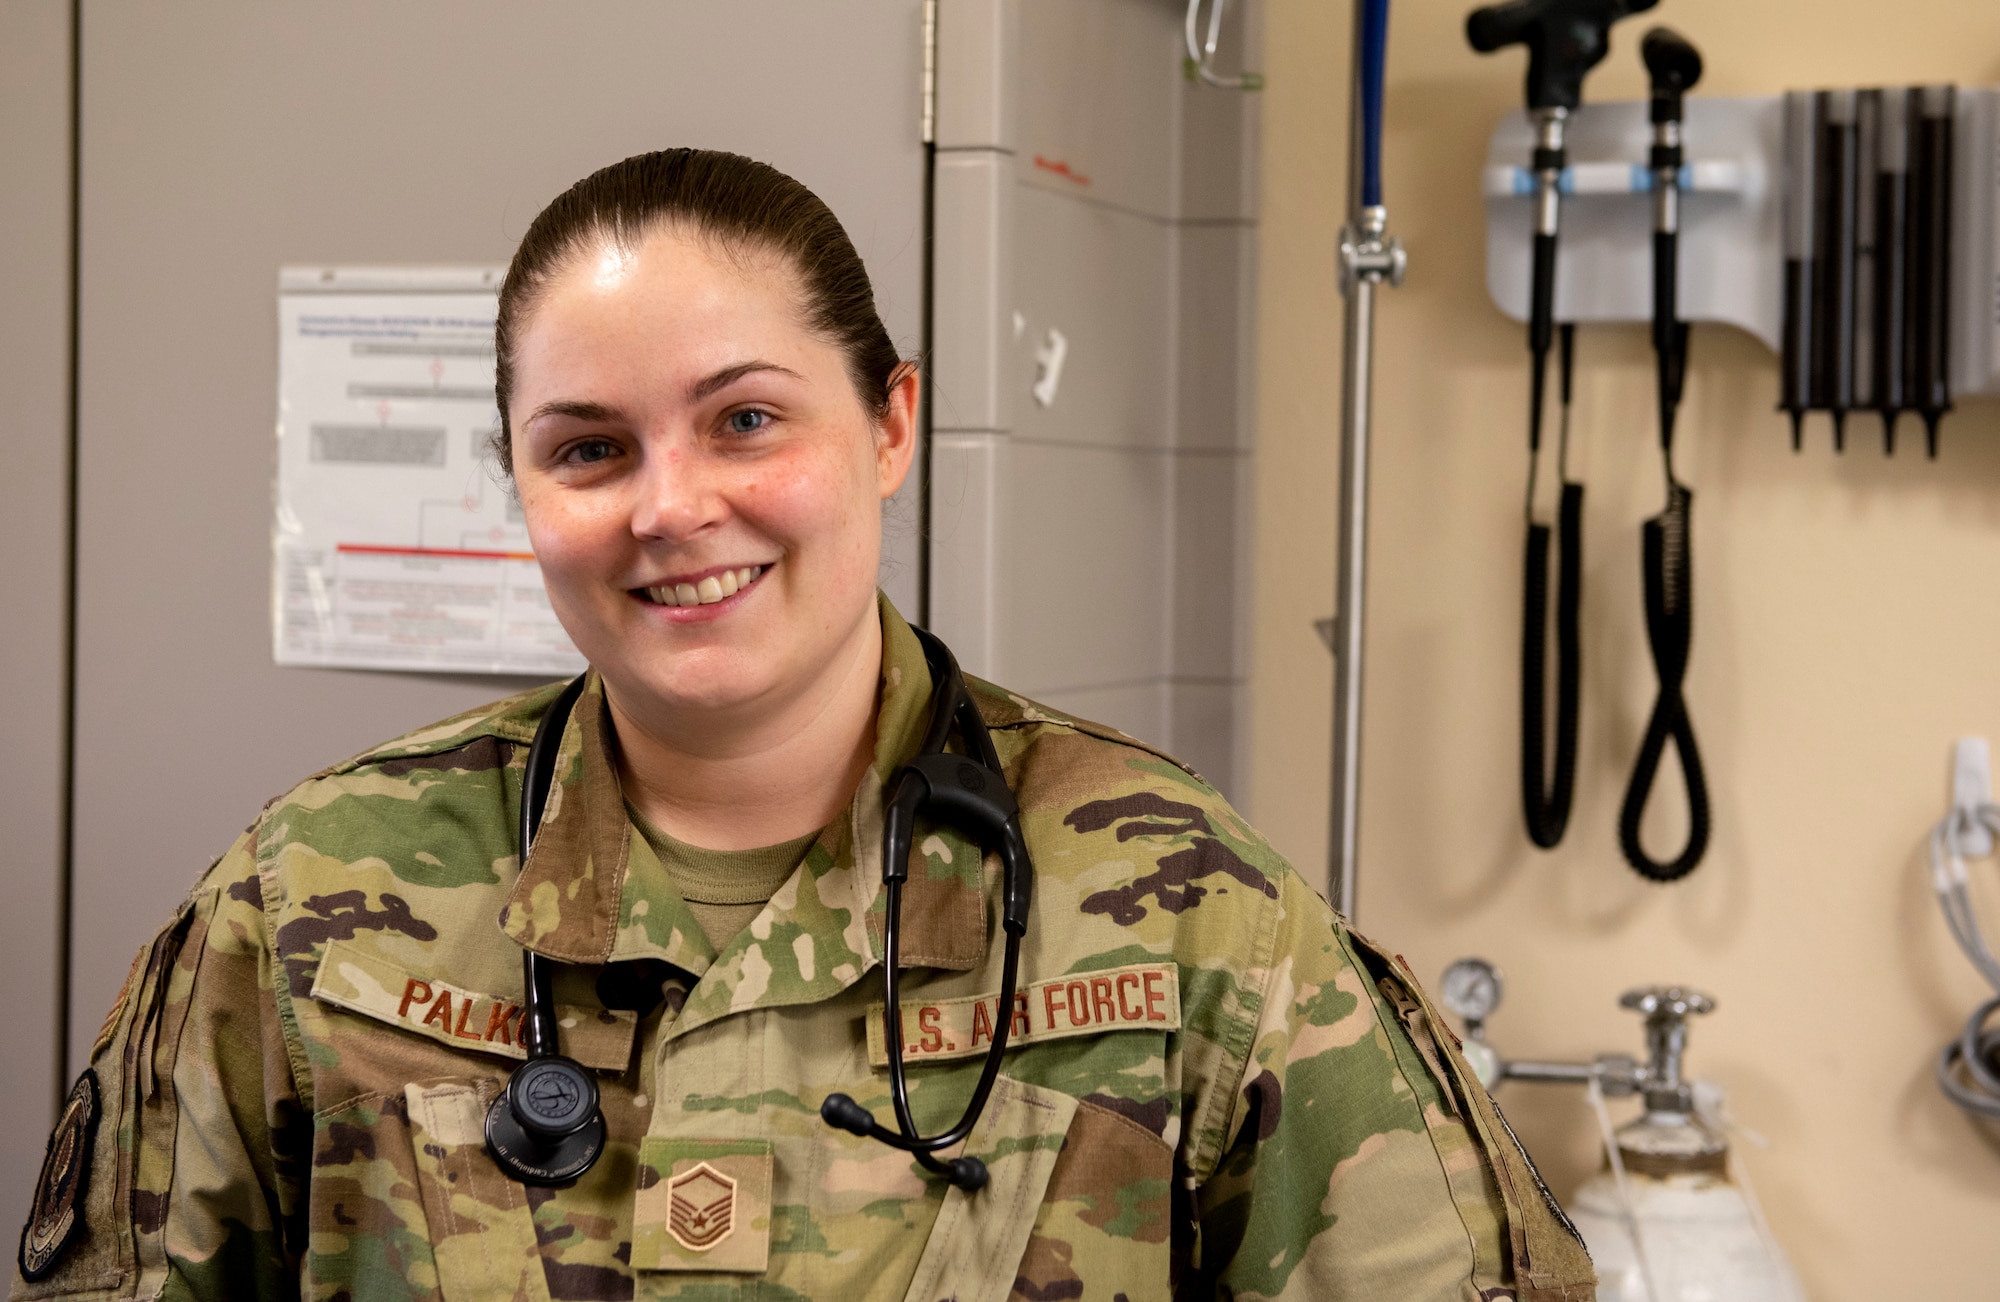 Master Sgt. Nicole Palko, 702nd Munitions Maintenance Squadron independent duty medical technician, poses for a picture at Buechel Air Base, Germany, February 25, 2021. IDMTs are uniquely qualified in several medical specialties in order to operate independently in remote locations. (U.S. Air Force photo by Capt. Erin Recanzone)